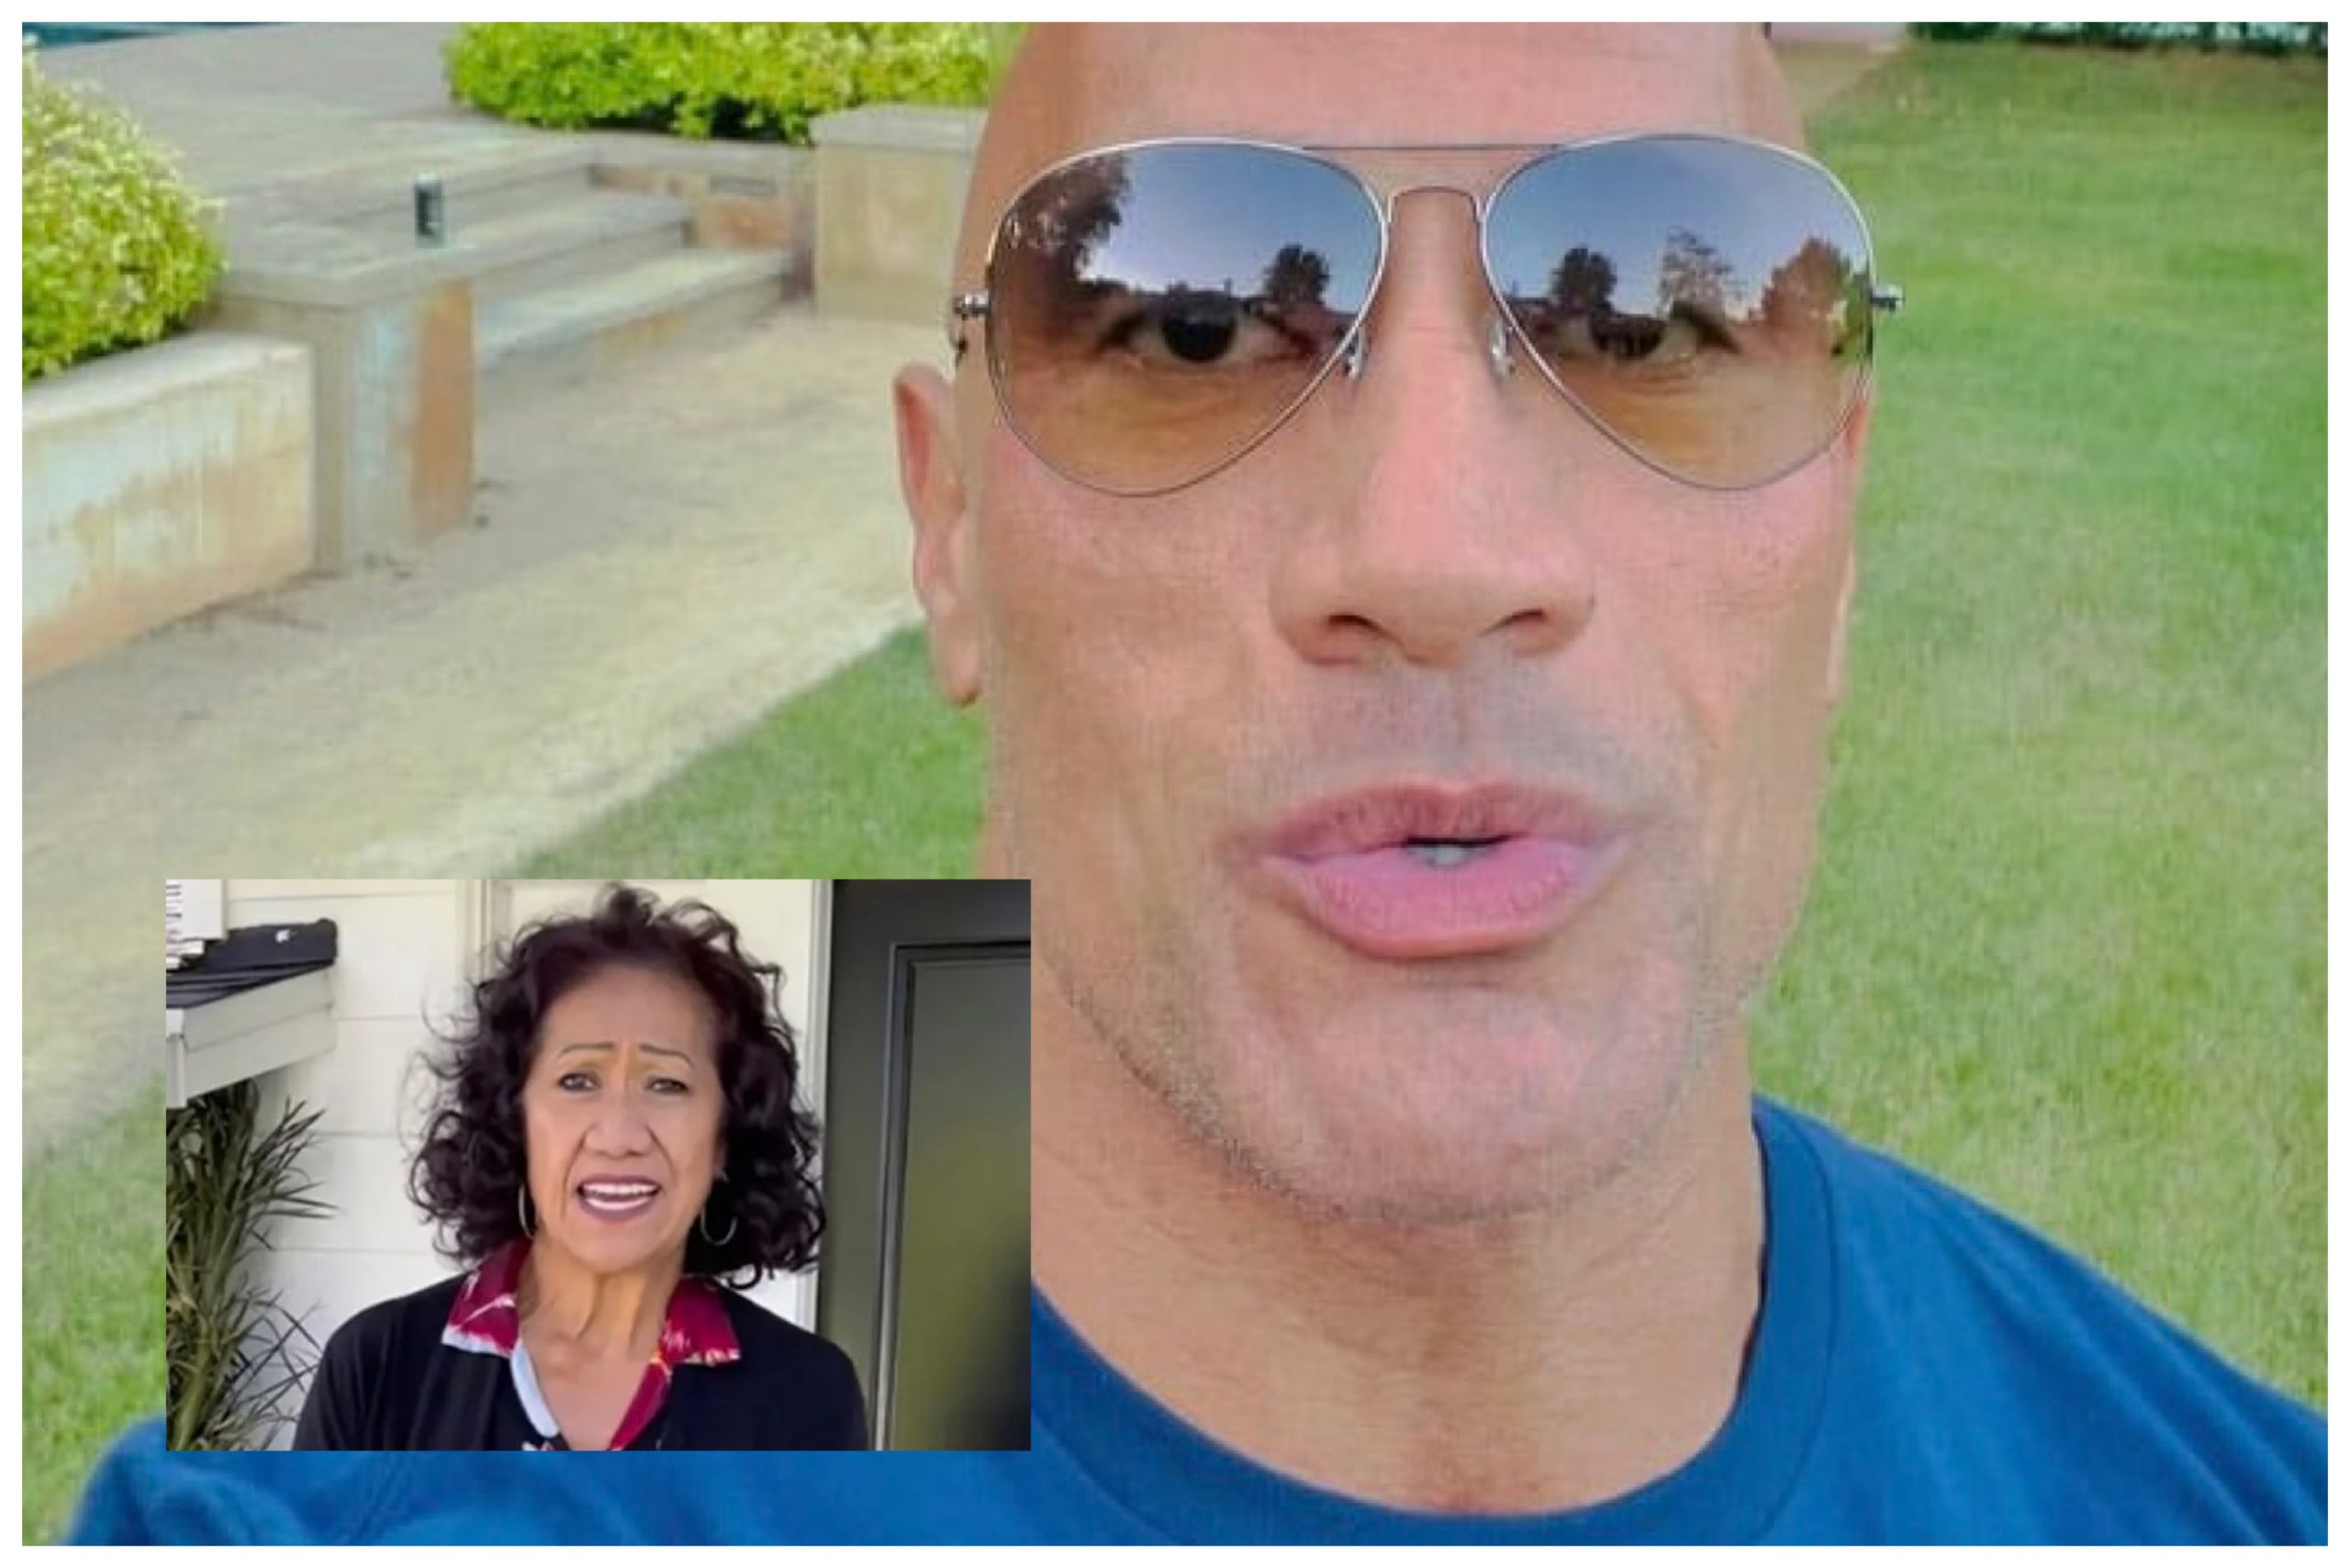 Dwayne ‘The Rock’ Johnson Reveals His Mom Was In A Serious Car Crash in Los Angeles